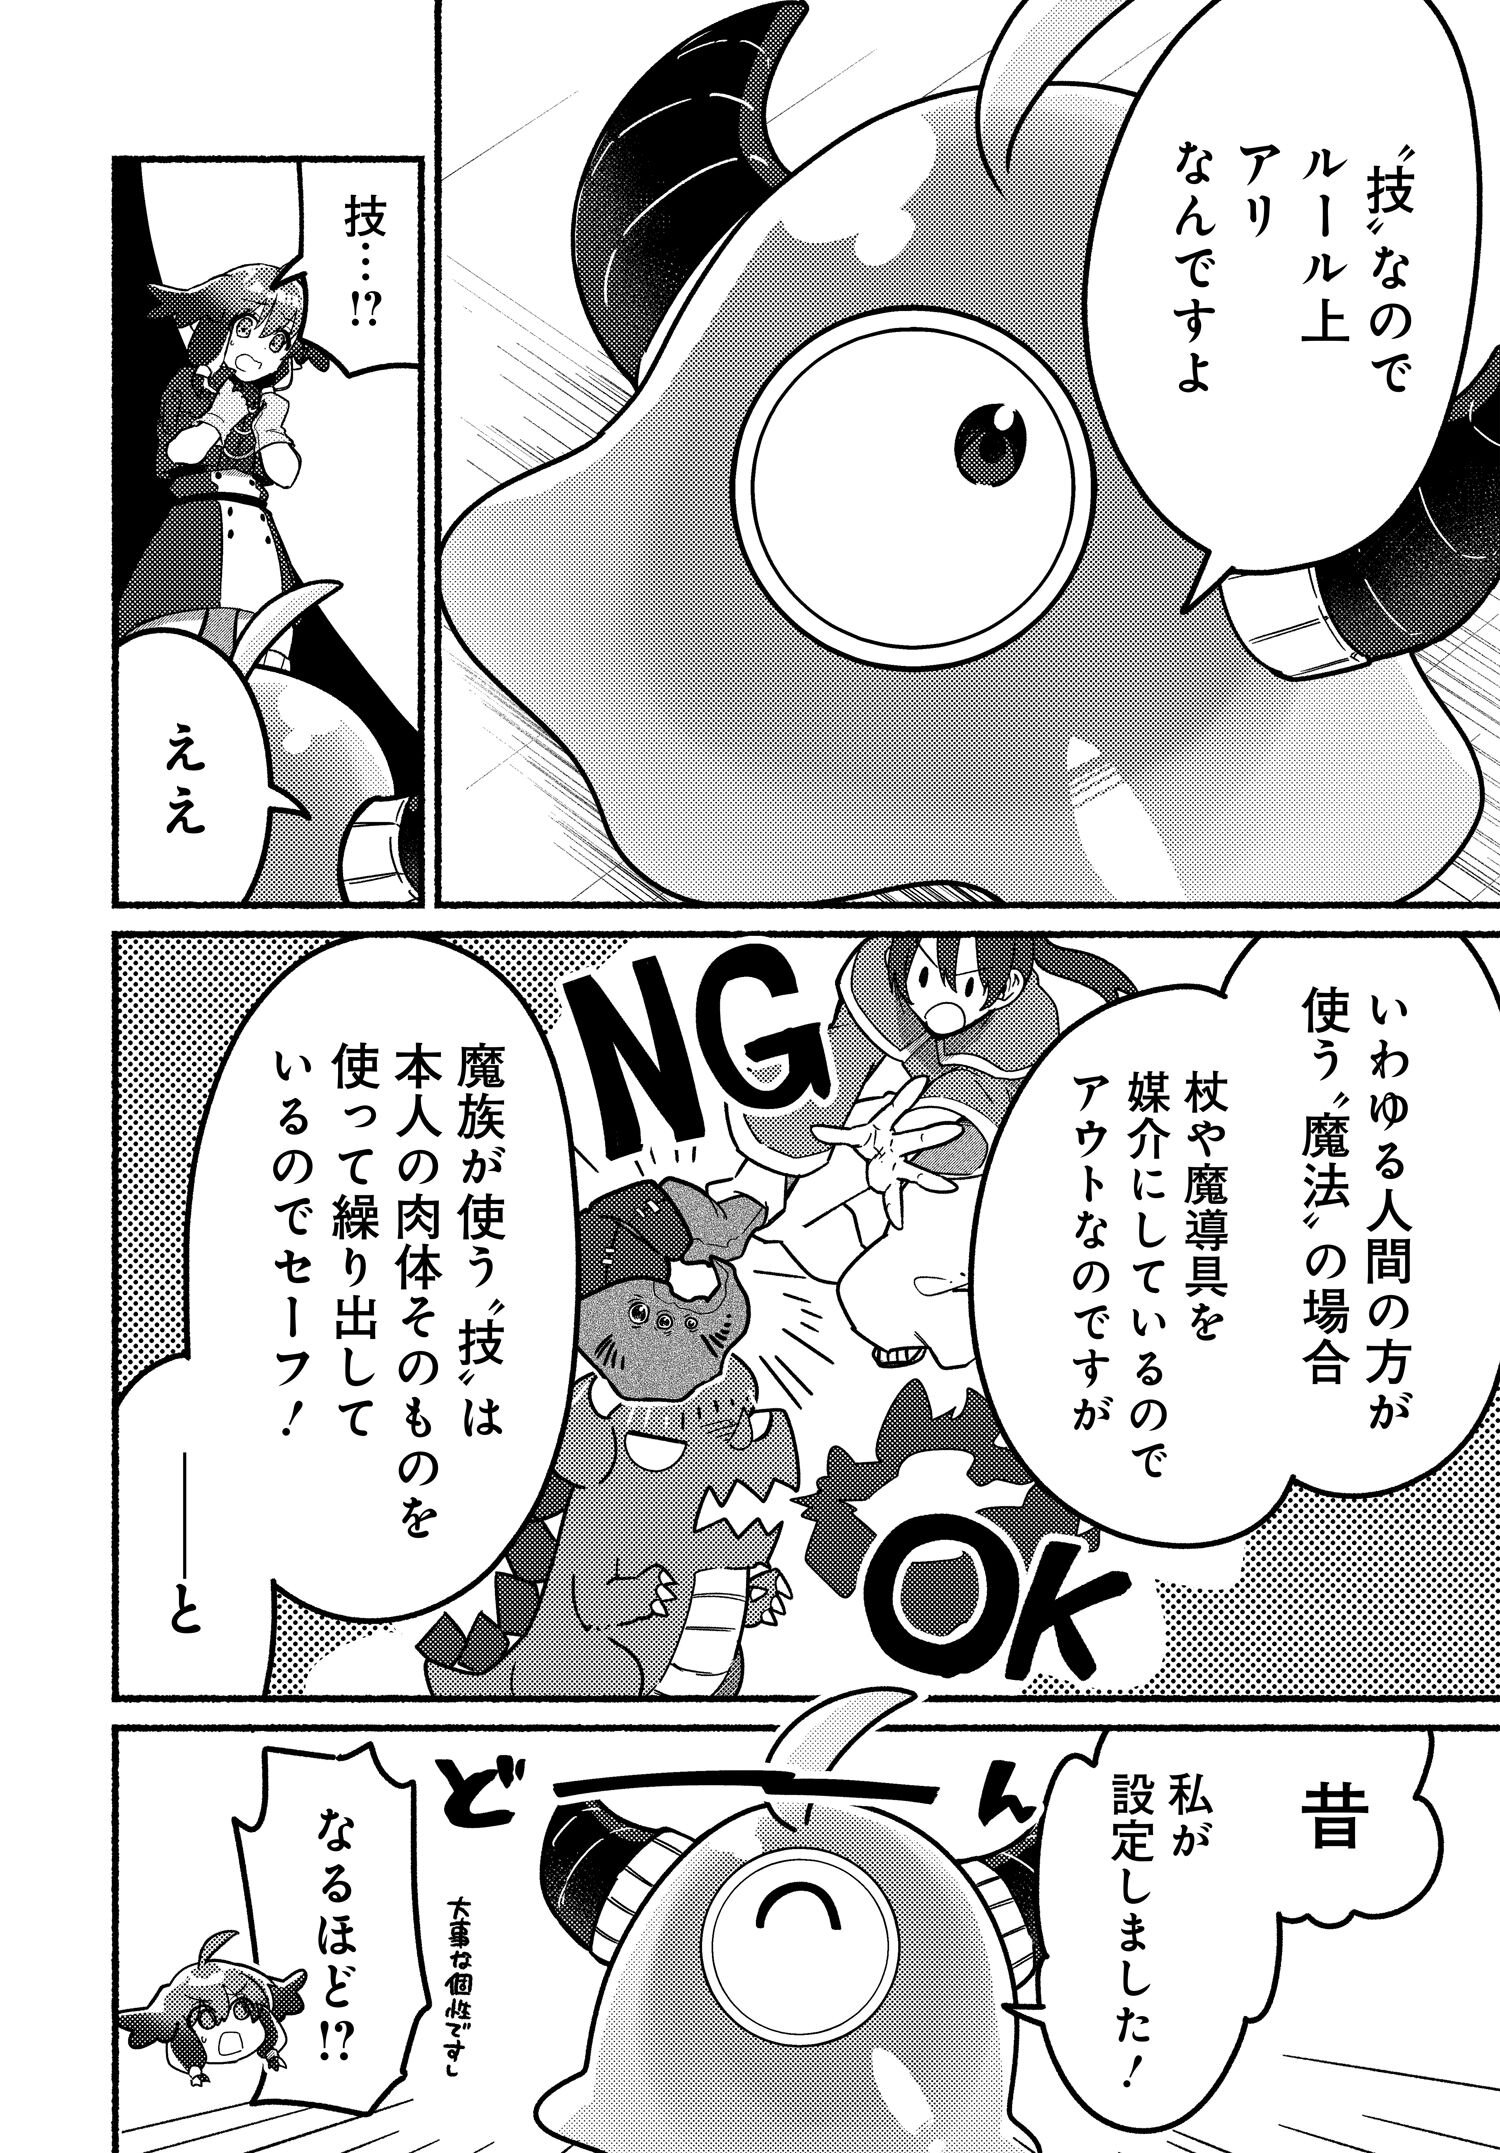 Shougyou Dungeon to Slime Maou - Chapter 9.1 - Page 2